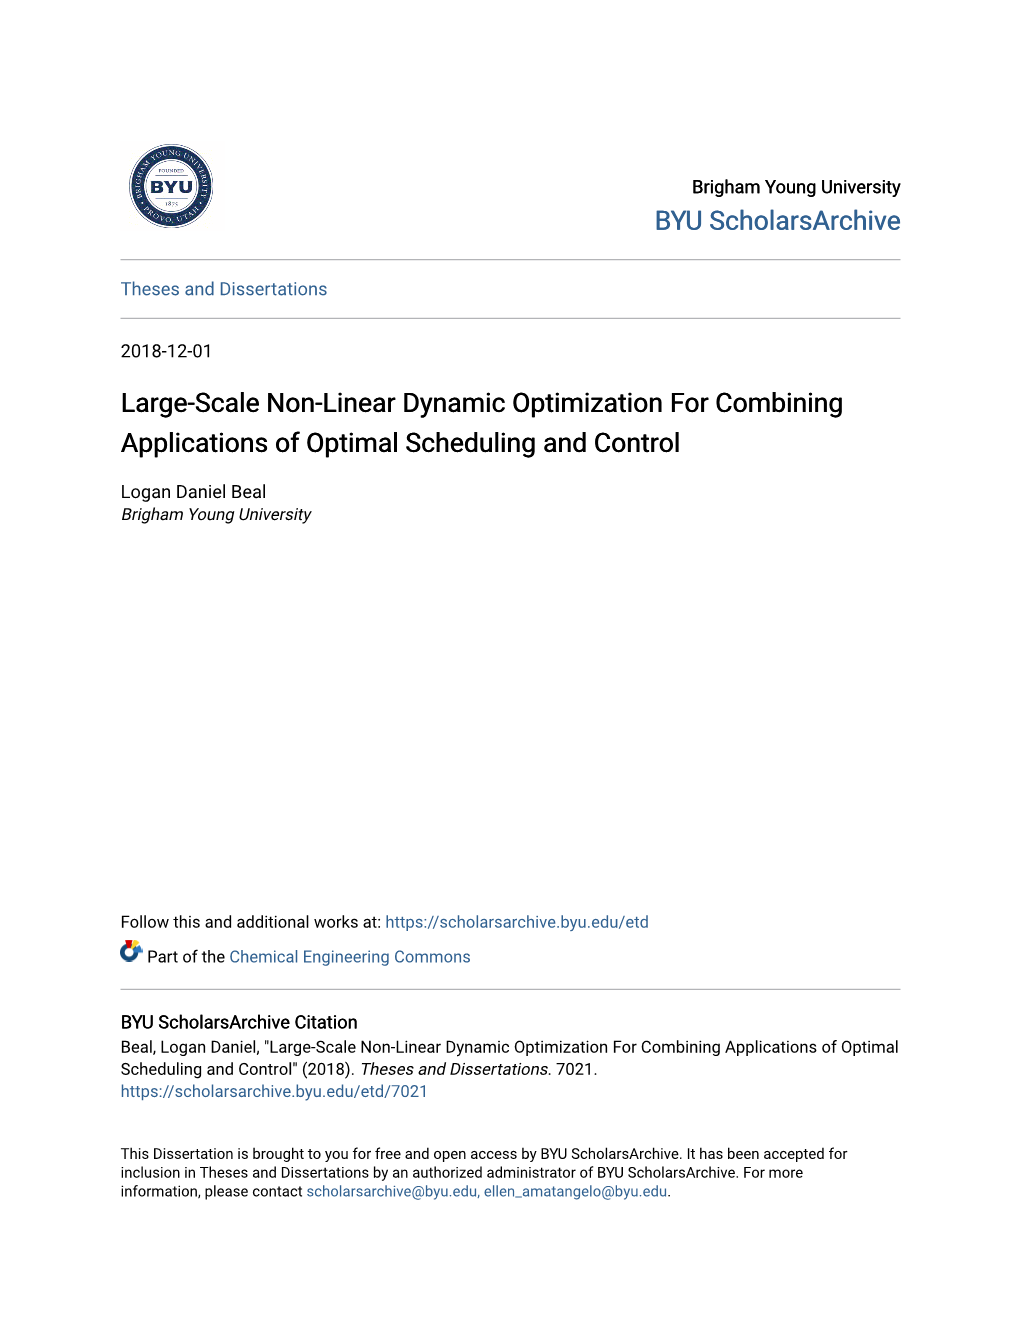 Large-Scale Non-Linear Dynamic Optimization for Combining Applications of Optimal Scheduling and Control